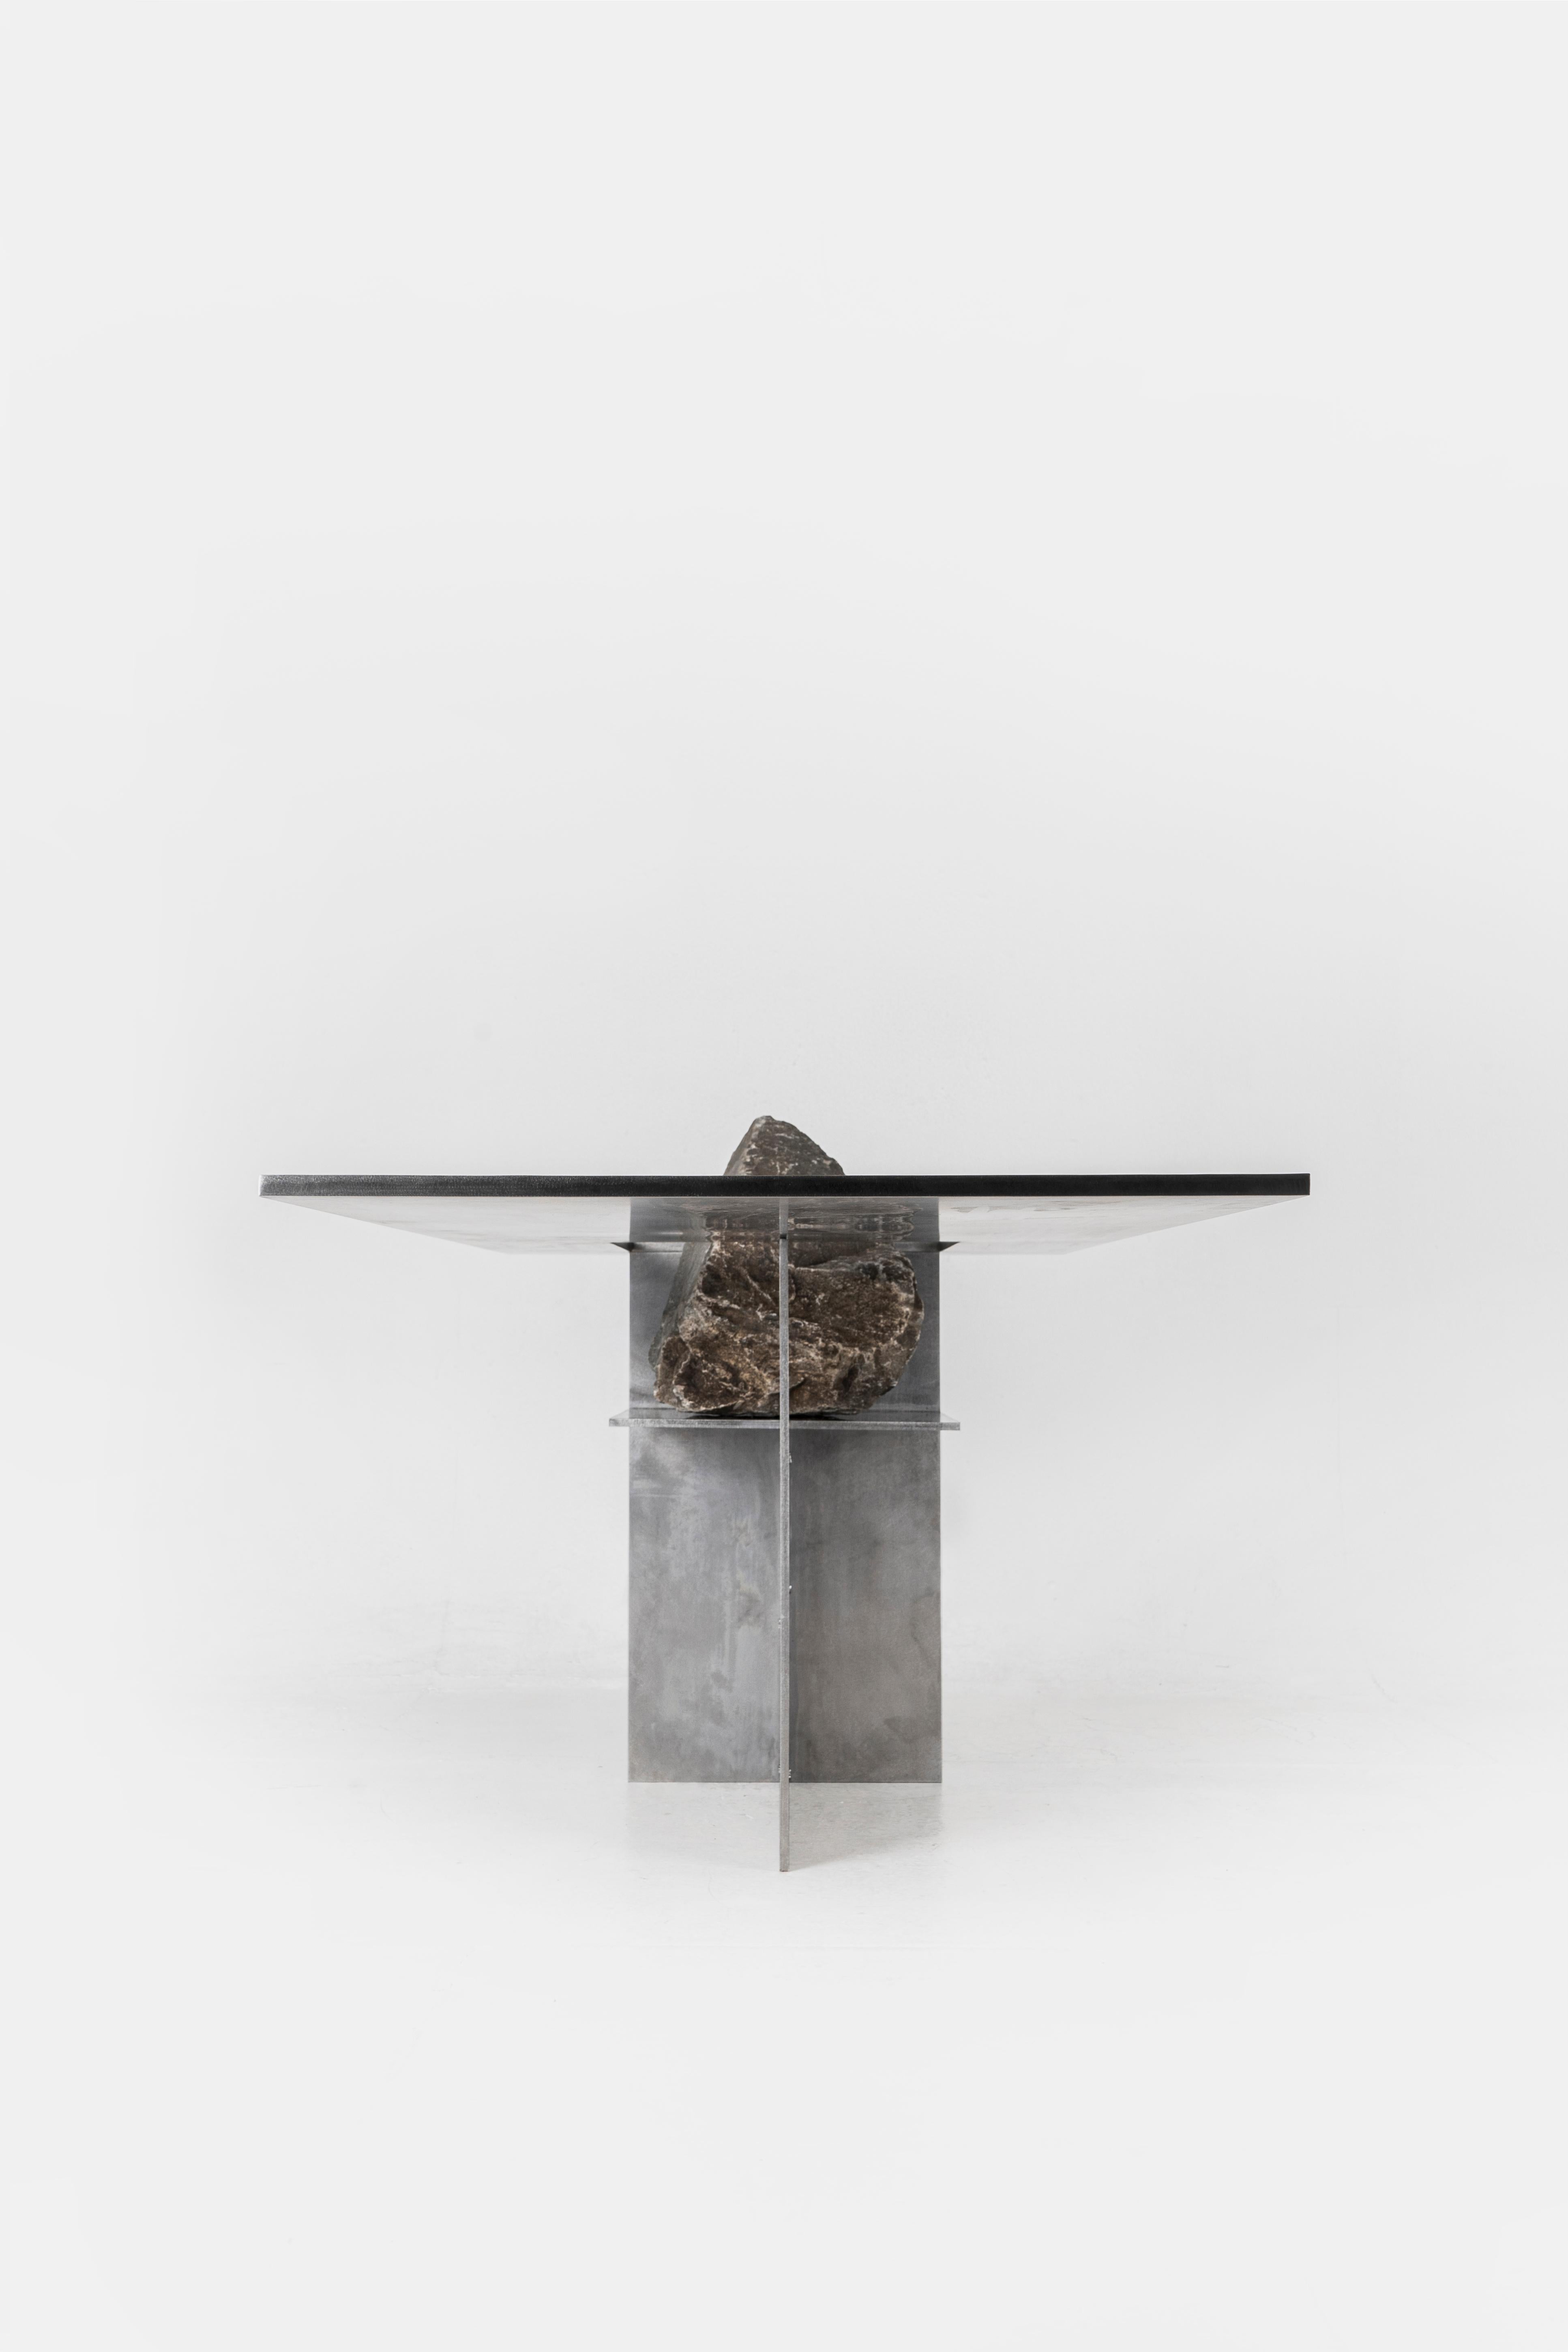 Proportions of stone table by Lee Sisan
2019
Dimensions: W 140 x D 60 x H 55 cm
Materials: Stainless steel, natural stone

Each piece is made to order and uses natural stones, so please expect some variability in design.

